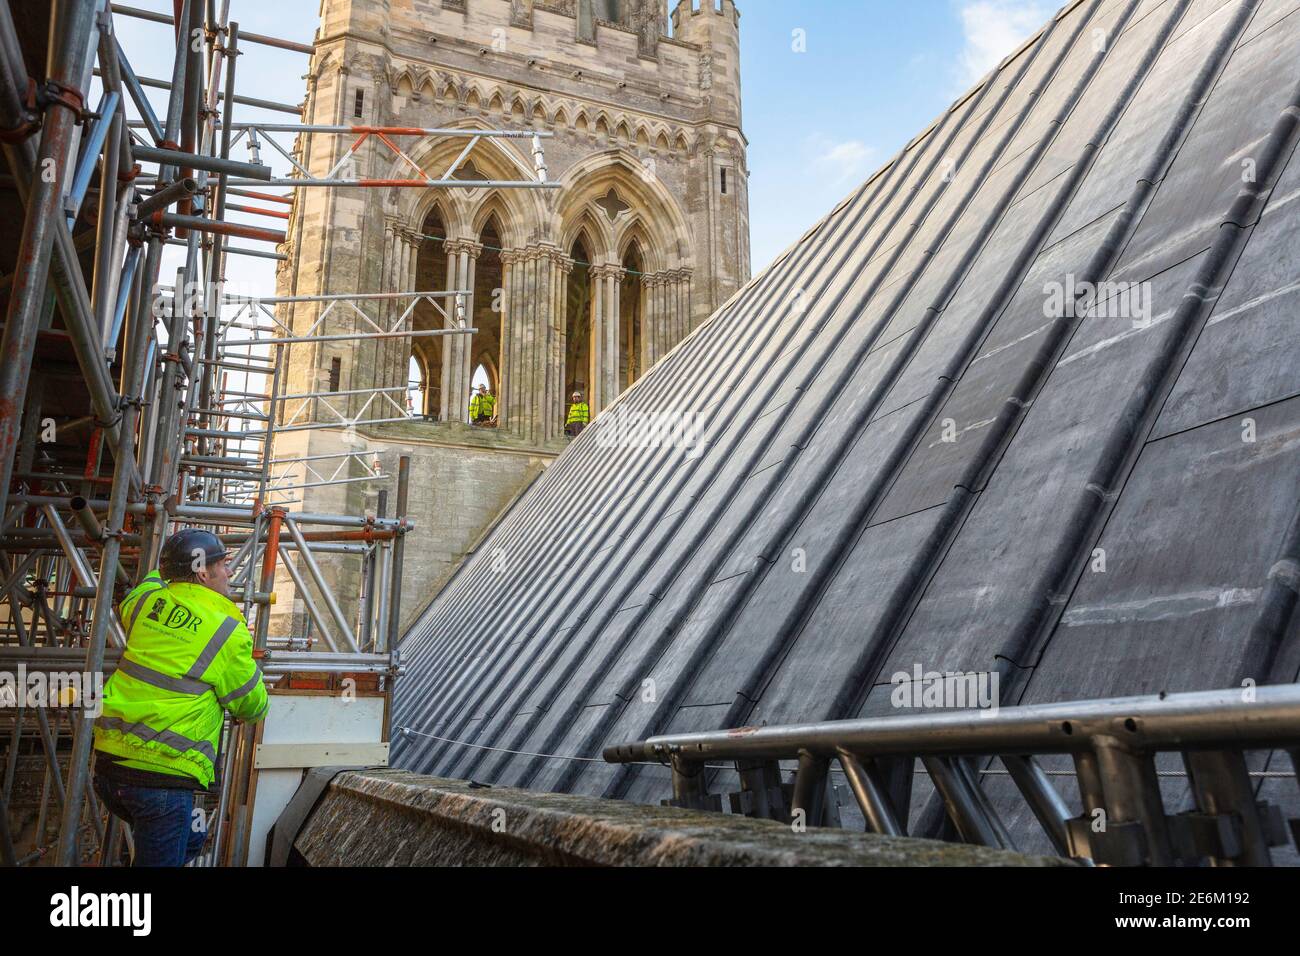 Workmen put the finishing touches to a new lead roof over the Quire at Chichester Cathedral. Picture date Thursday 29th November, 2018. Picture by Chr Stock Photo